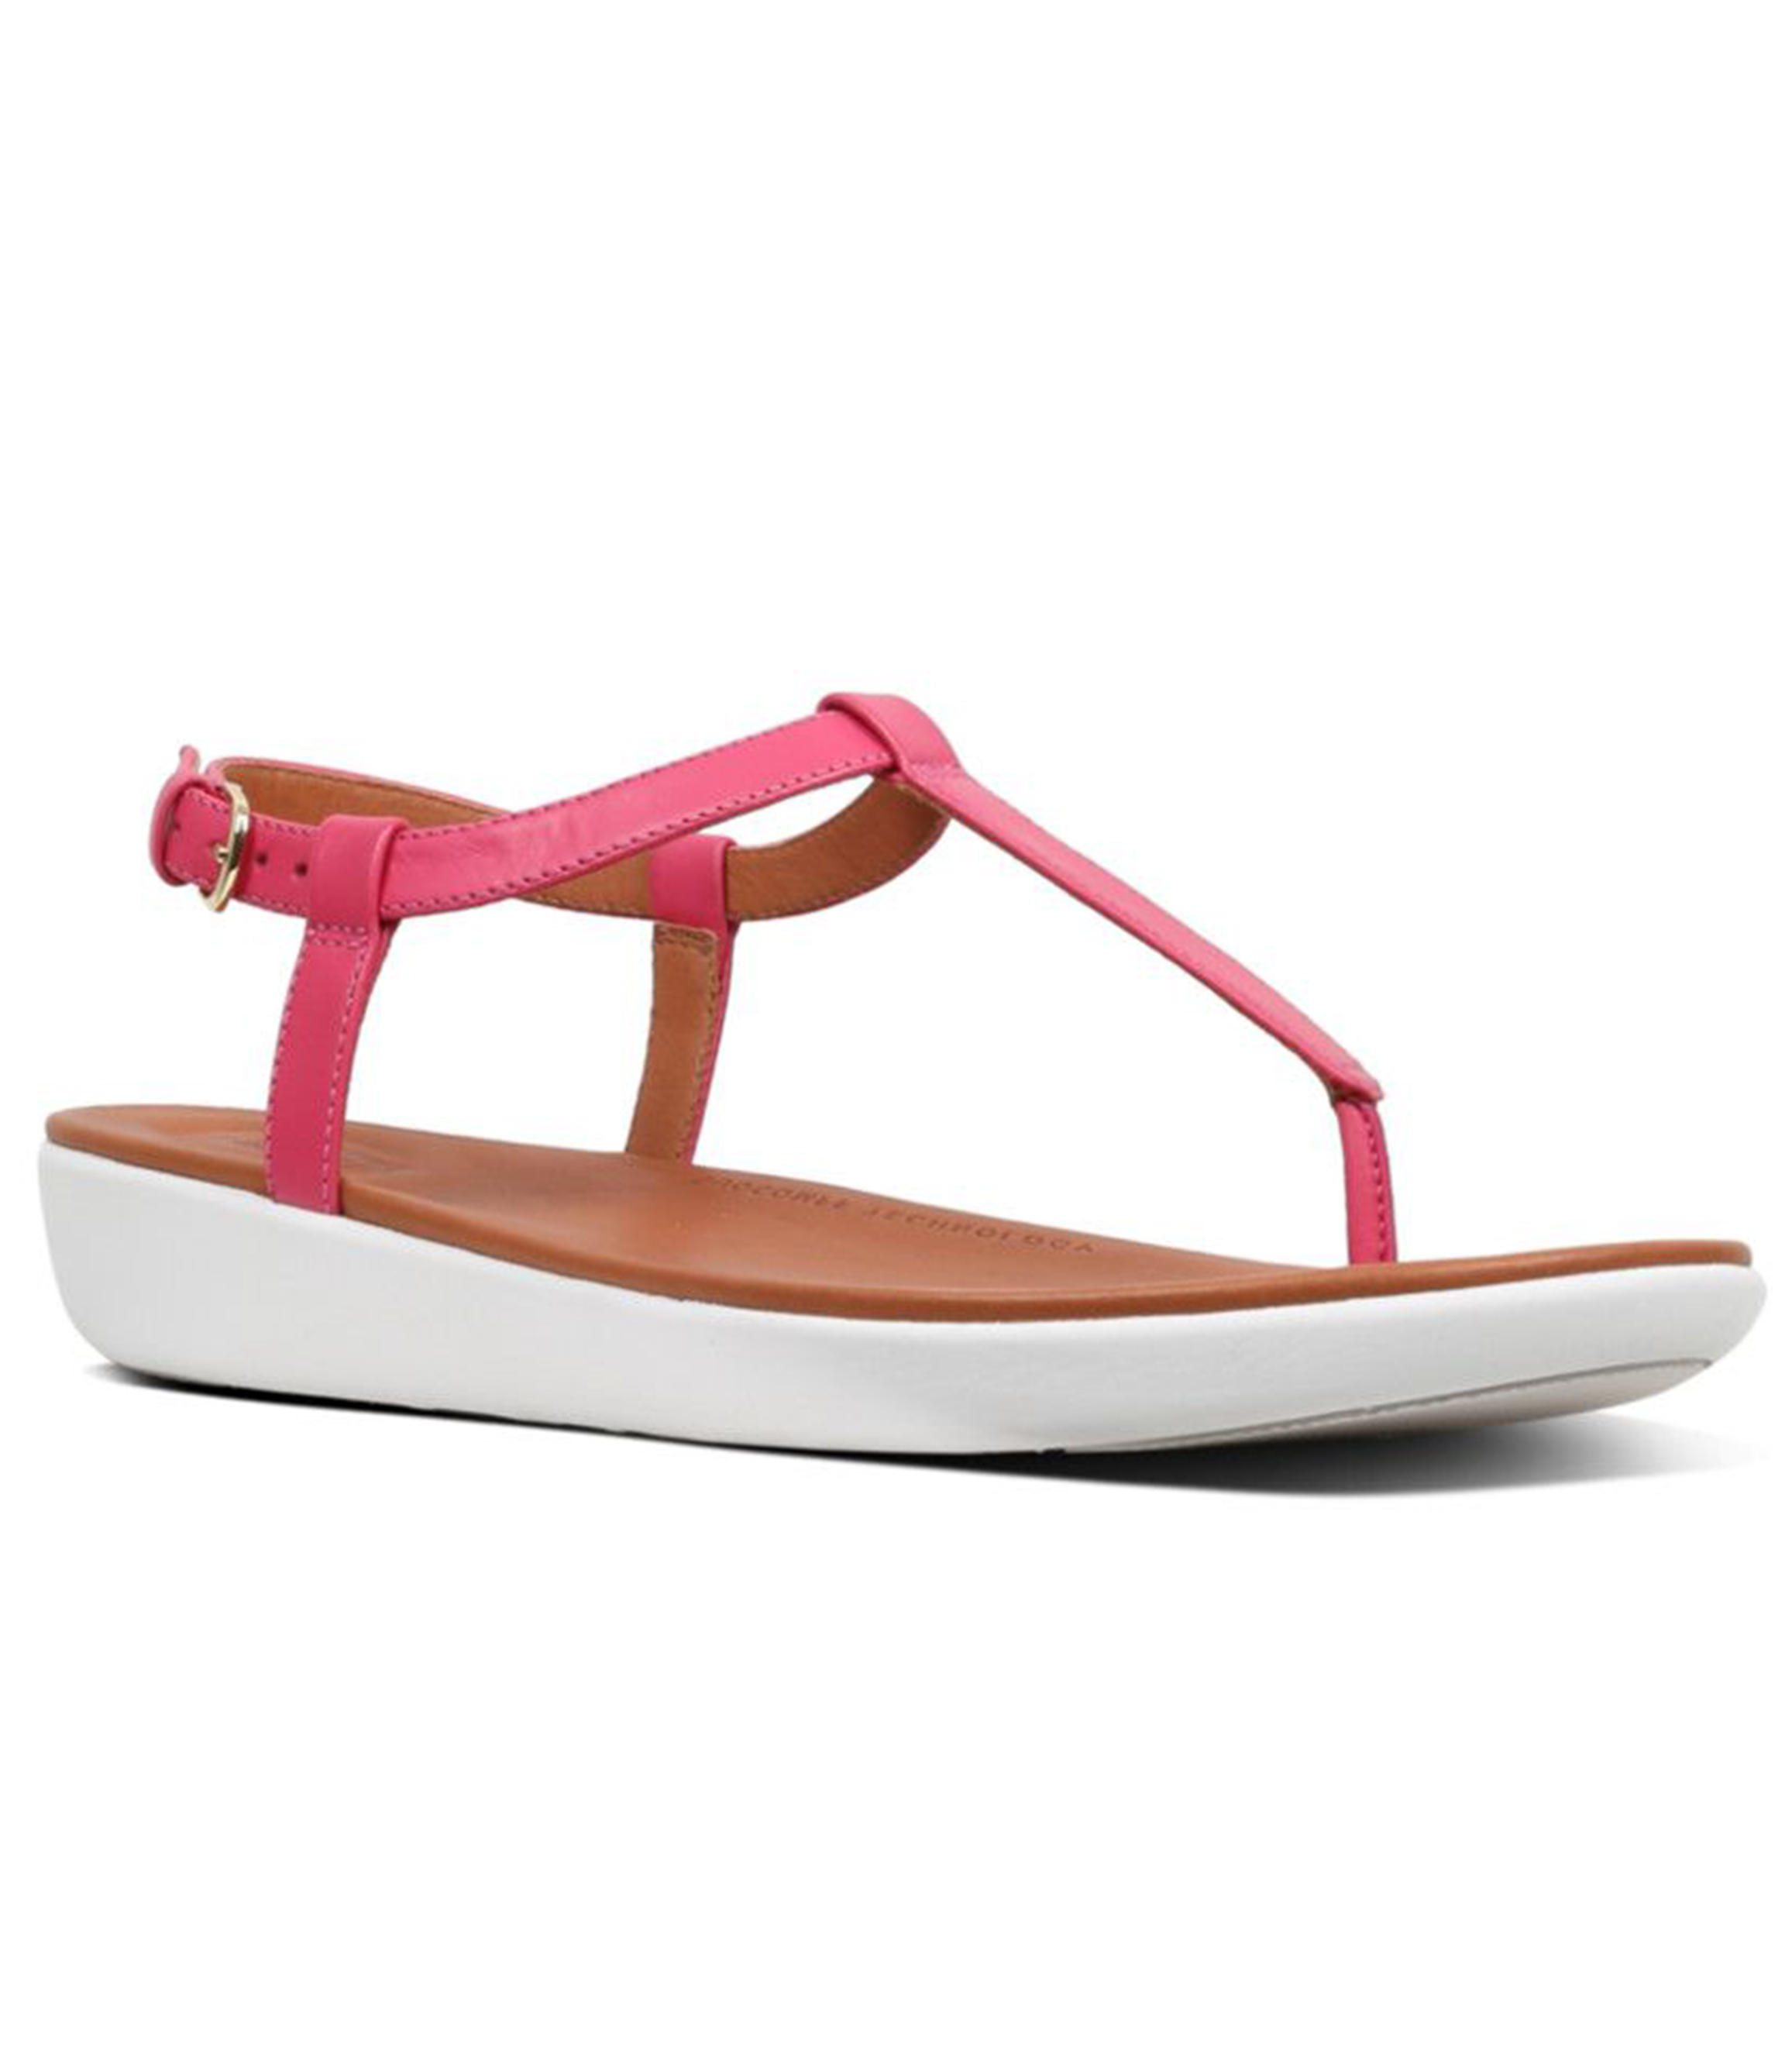 FIT FLOP PSYCHEDELIC PINK LEATHER TIA TOE- THONG SANDAL | Rosella ...